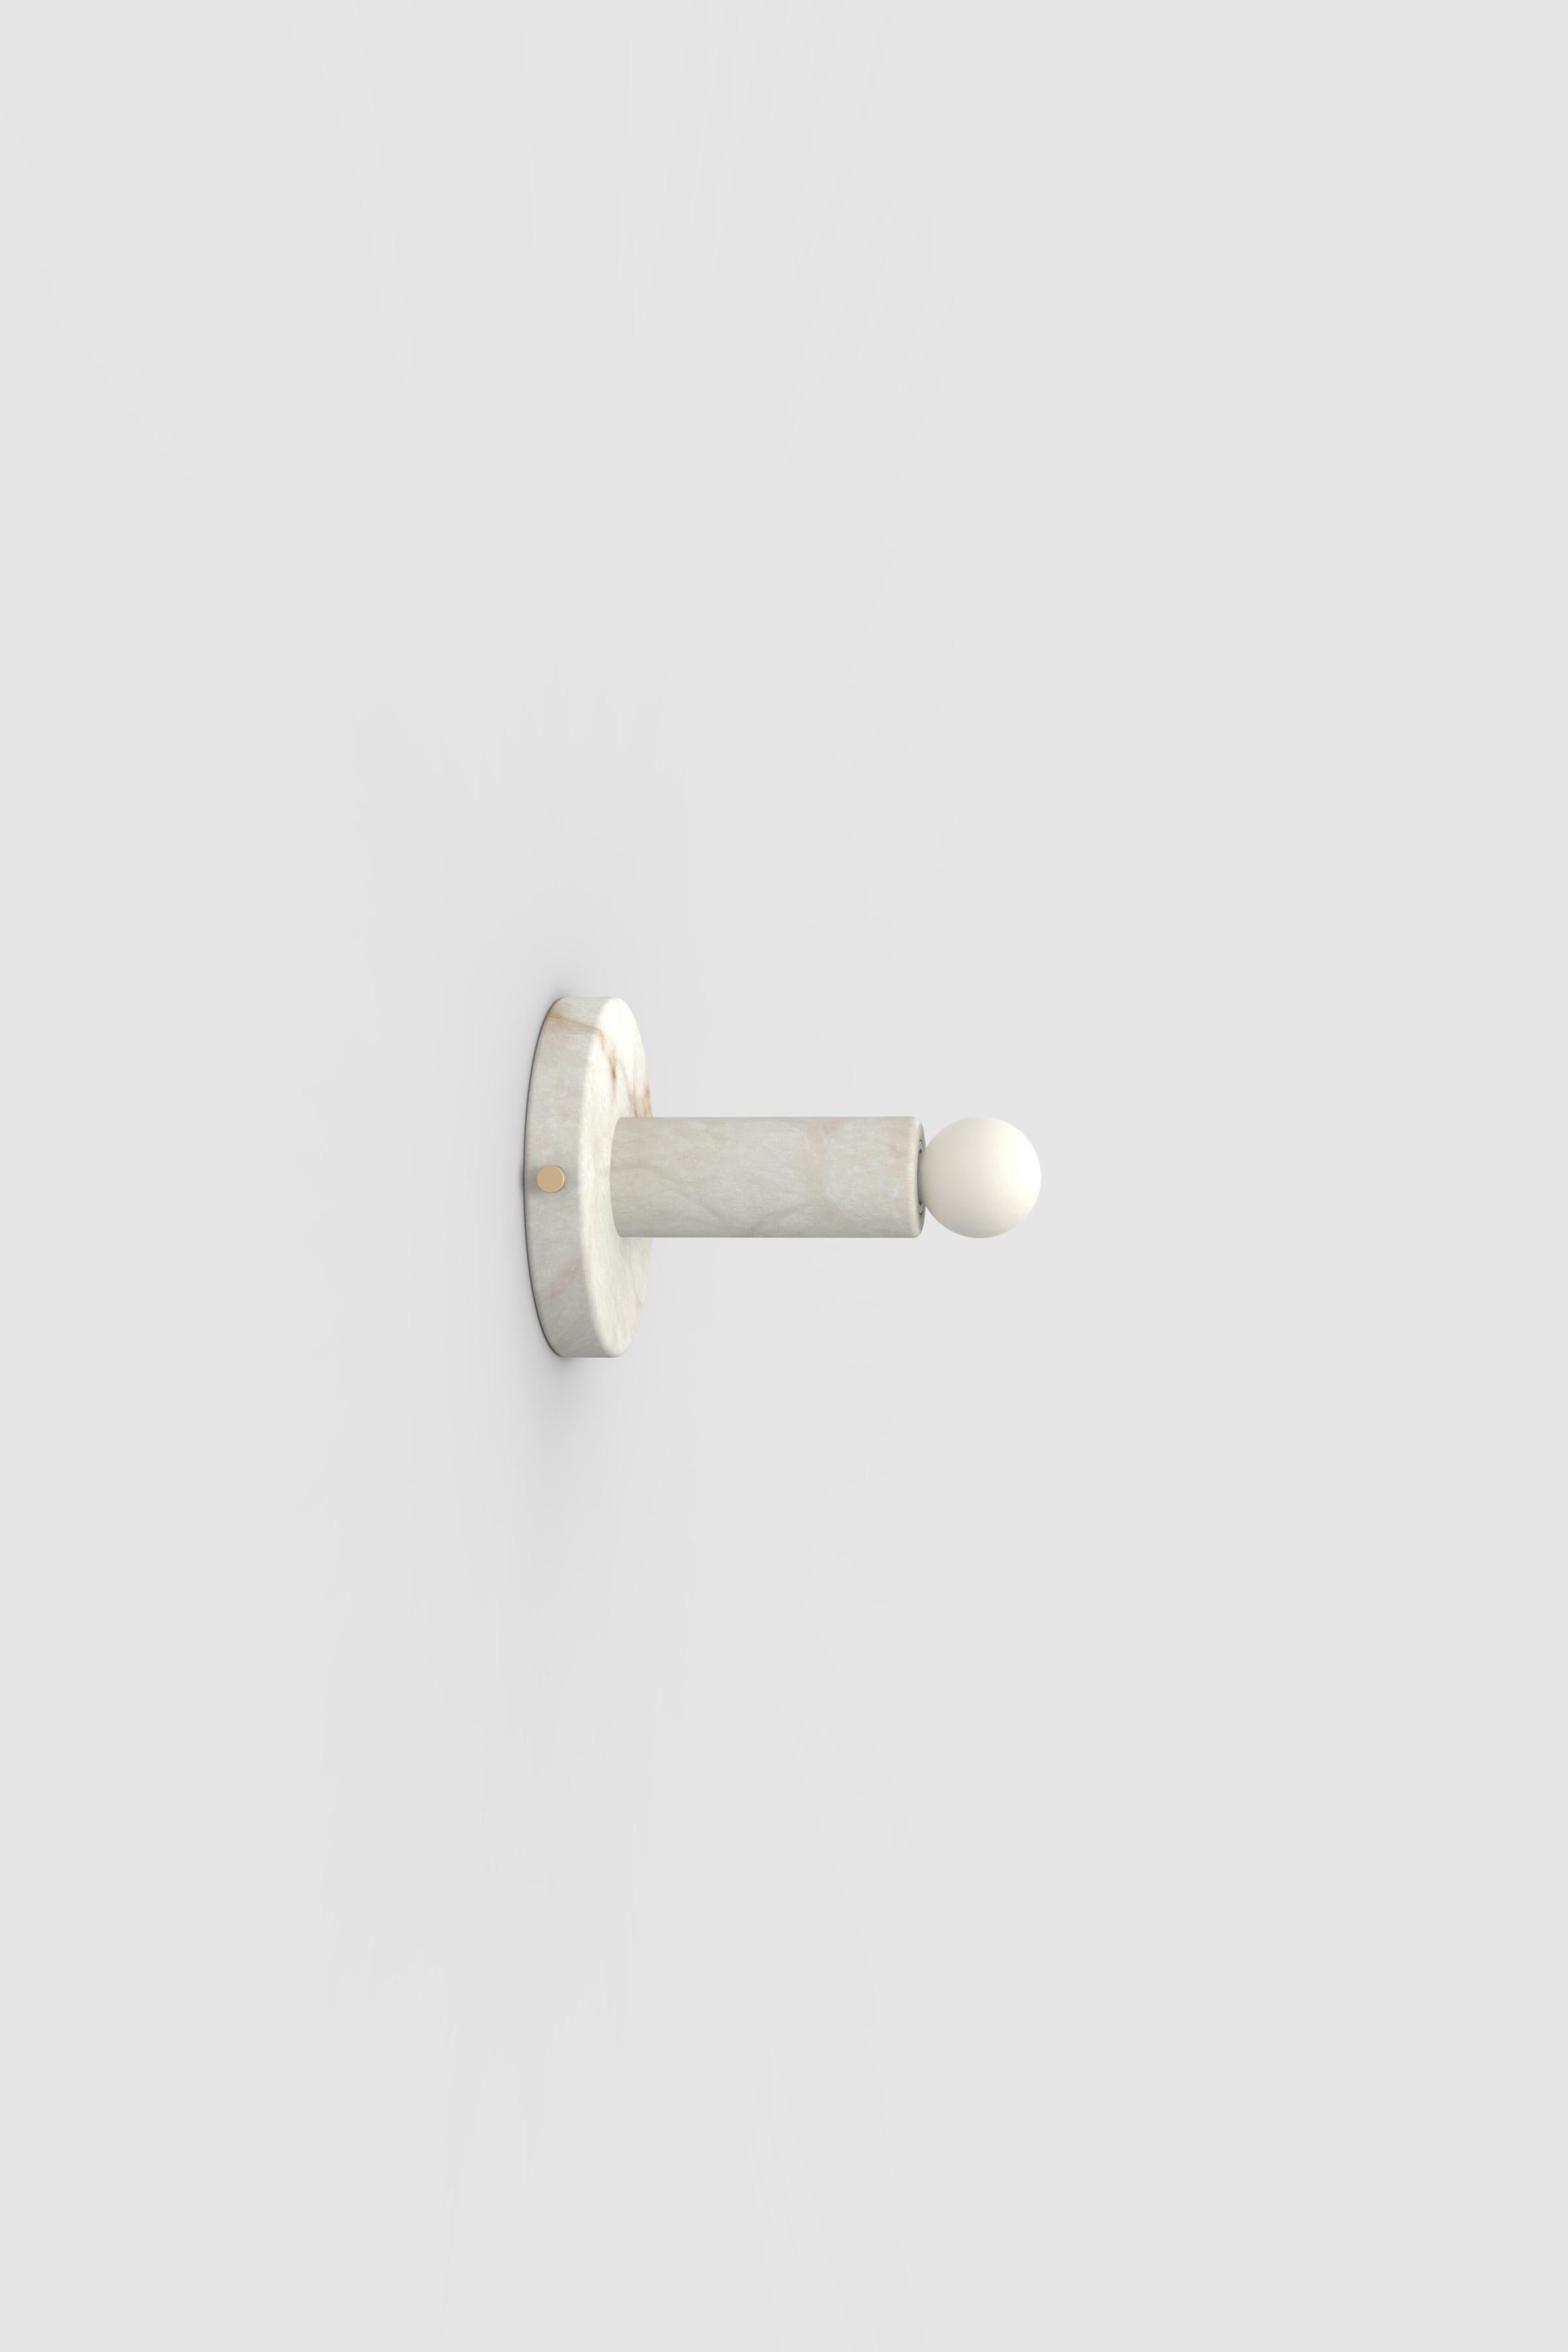 Orphan work 301A Sconce BB
shown in brushed brass with alabaster
Measures: 6”diameter x 6” height (not including bulb)
UL approved
holds (1) 60W candelabra bulb
must use LED bulb

Orphan Work is designed to complement in the heart of Soho,